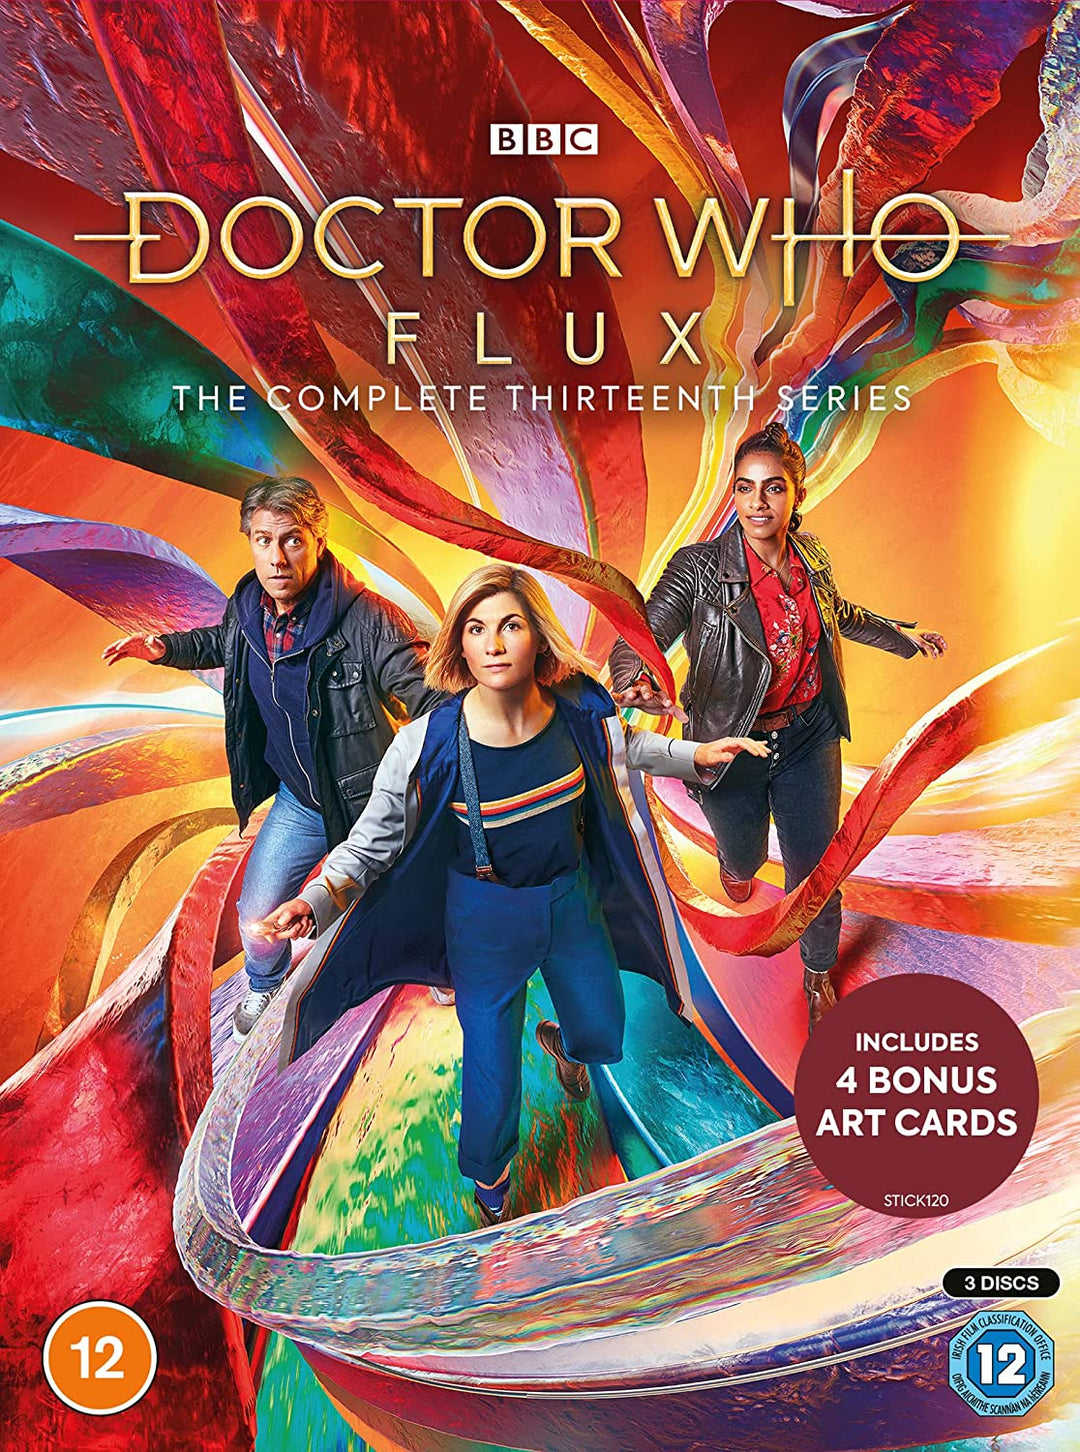 Doctor Who - Series 13 - Flux (includes 4 Exclusive Artcards) [2021] - Sci-fi [DVD]